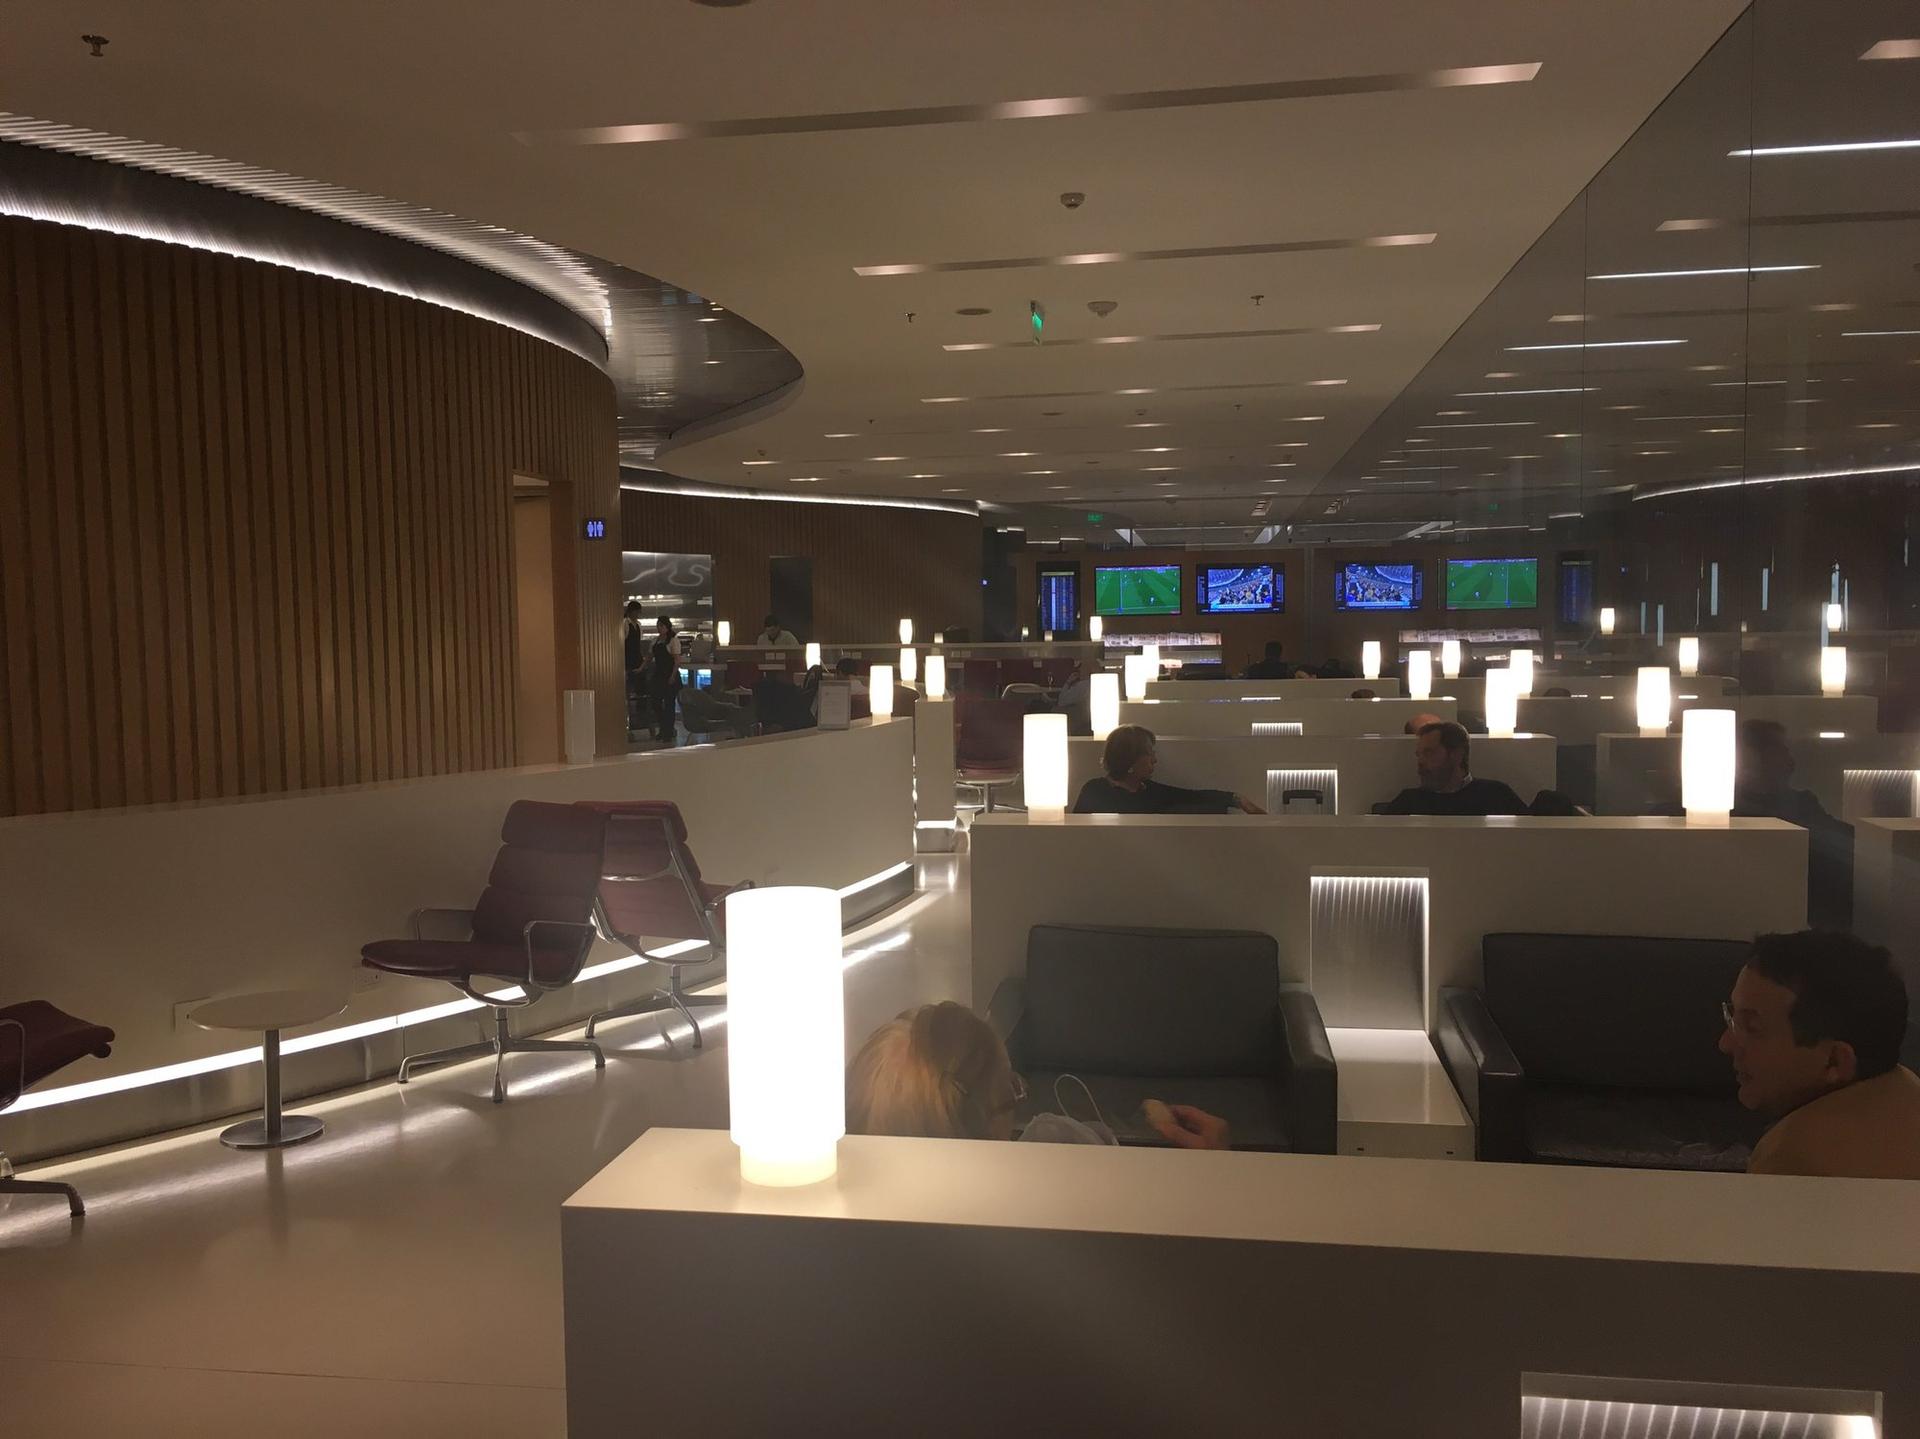 American Airlines Admirals Club & Iberia VIP Lounge image 4 of 18